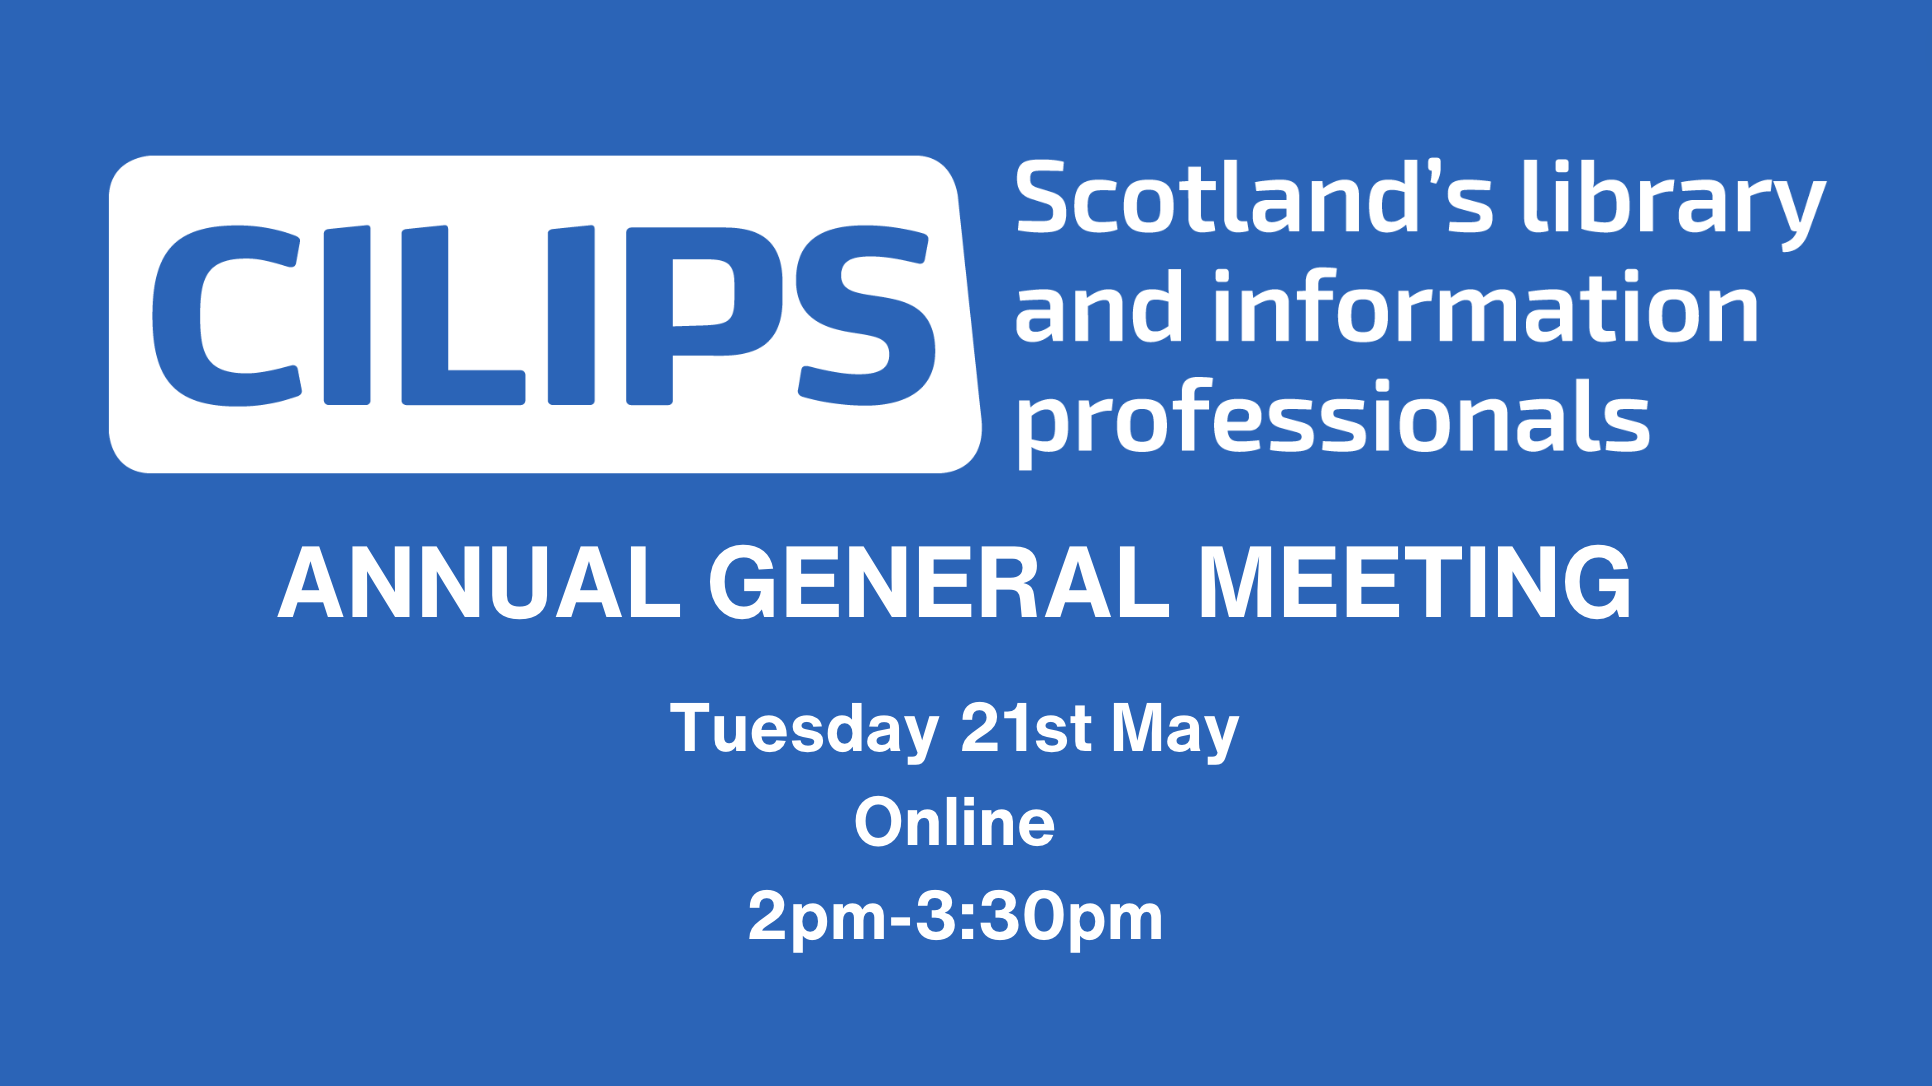 CILIPS Annual General Meeting, Tuesday 21st May, Online, 2pm-3:30pm.